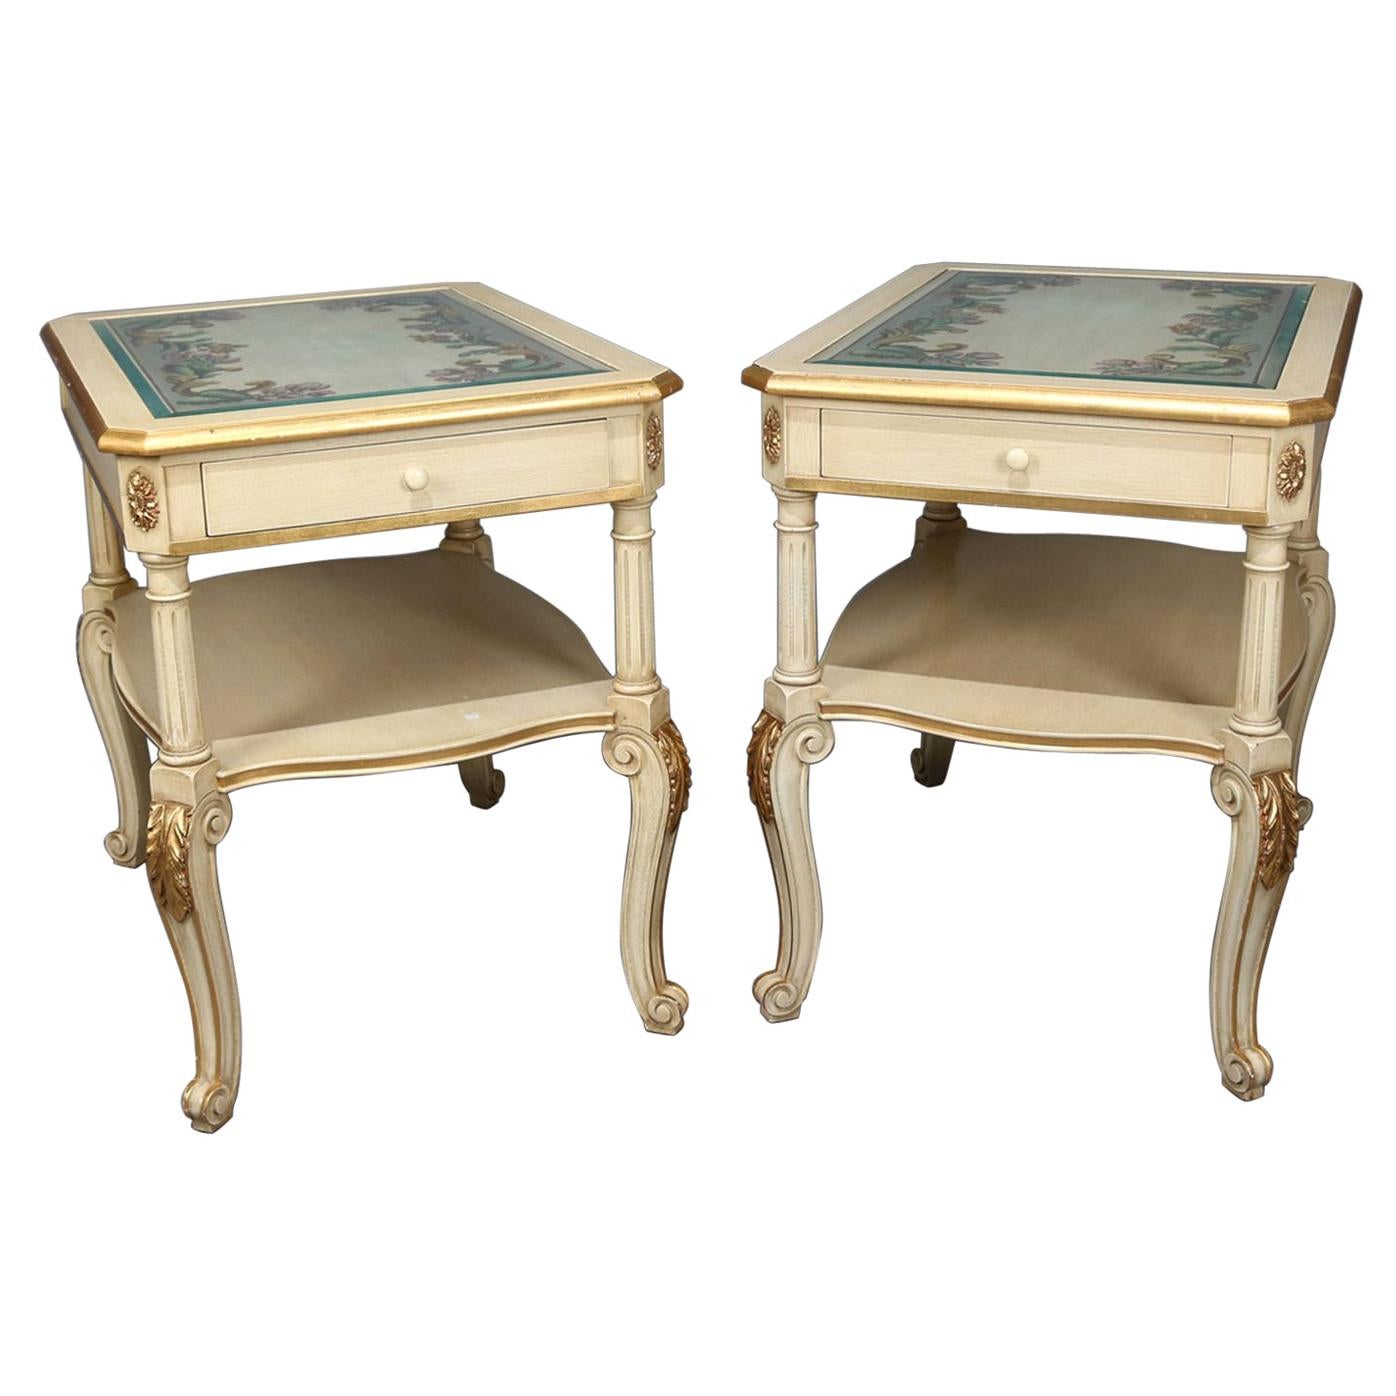 Pair of Provincial Style Carved Gilt and Paint Decorated End Stands 20th Century